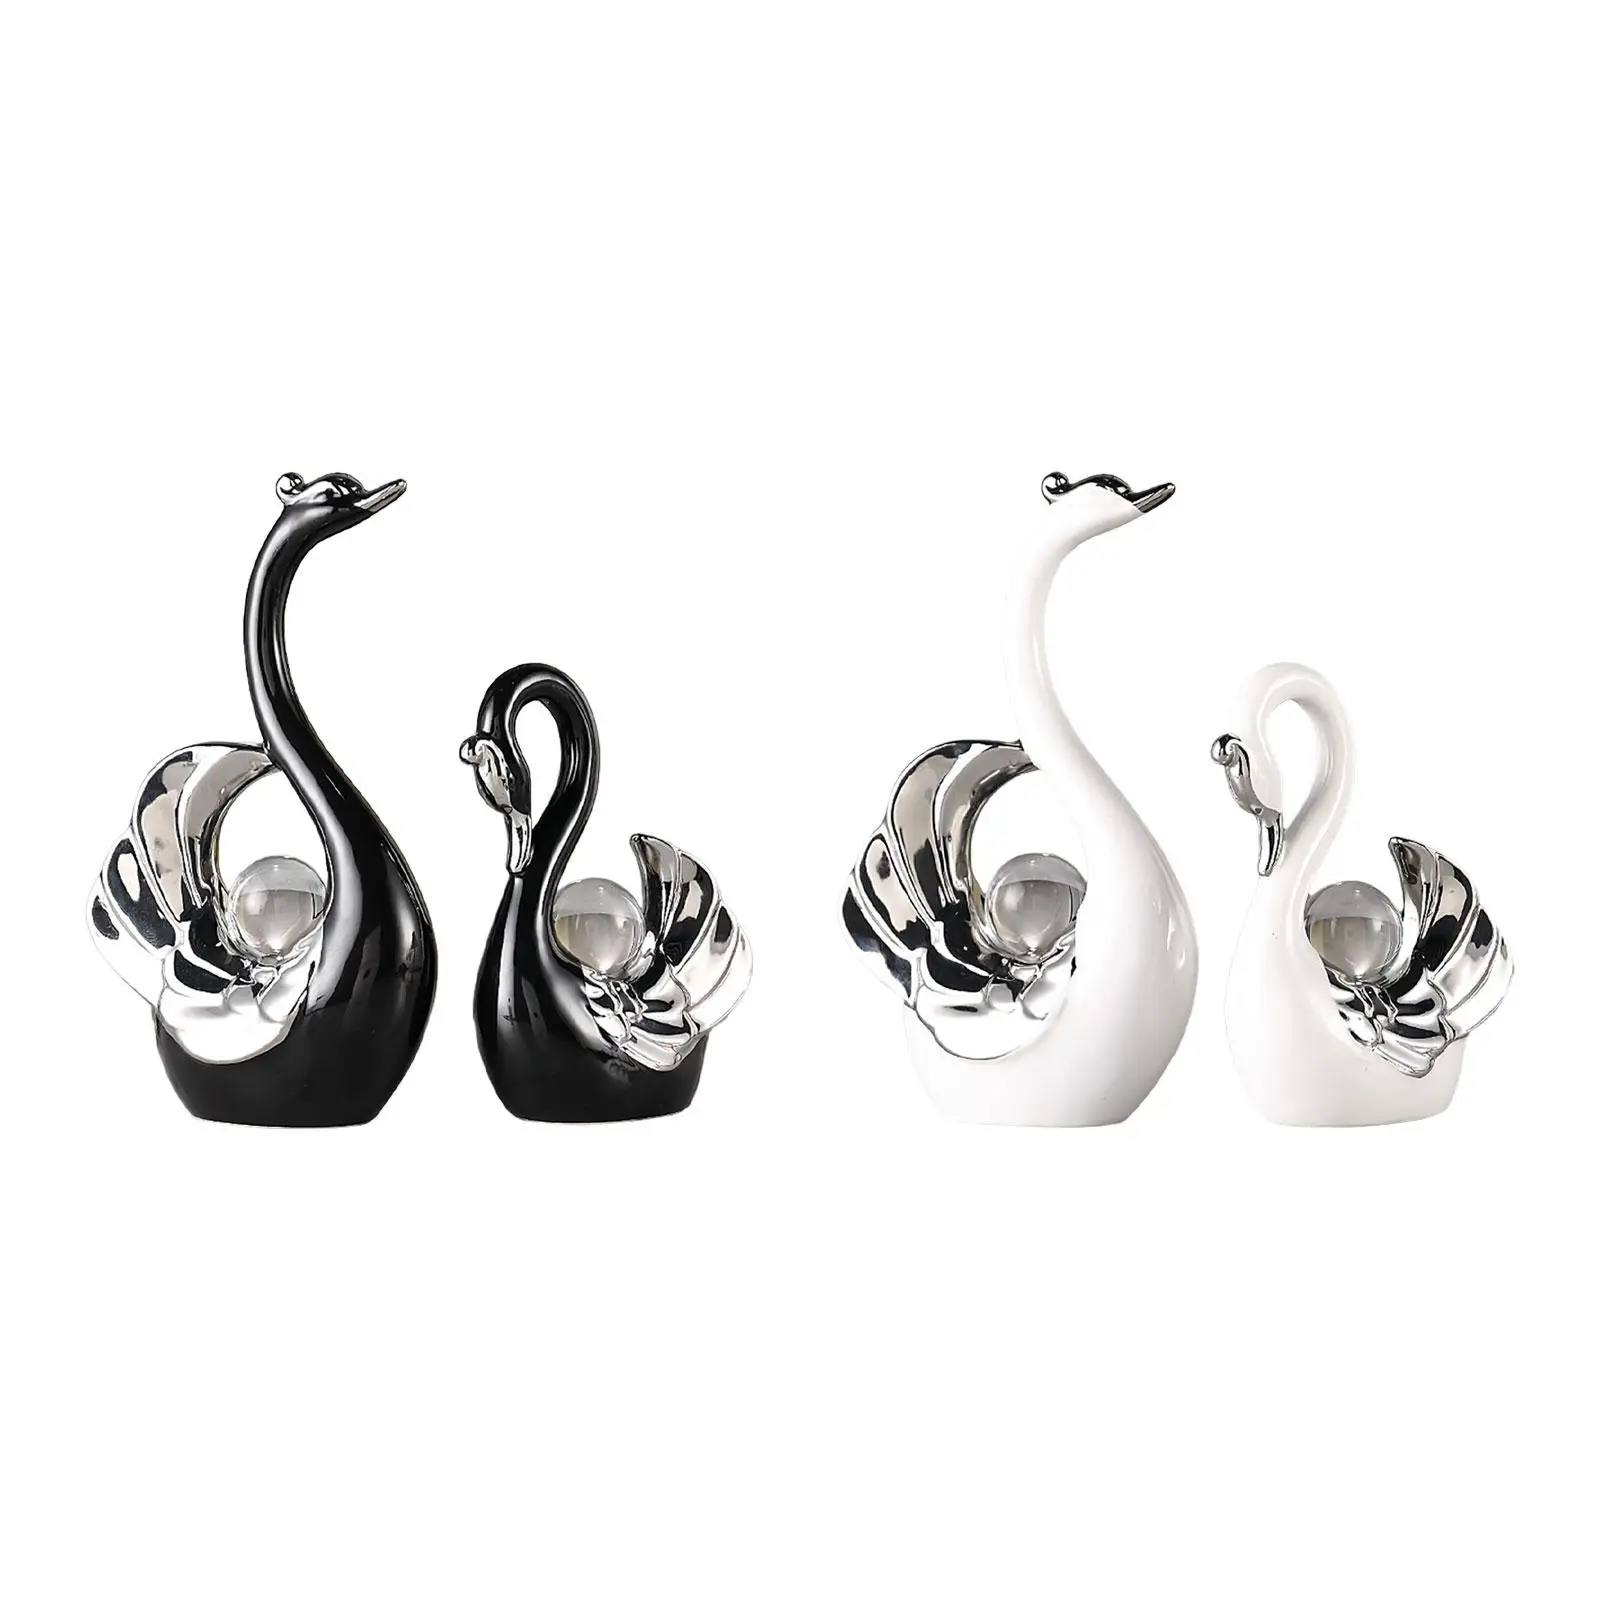 

2 Pieces Swan Figurines for Living Room Decor Crafts Swan Lover for Table Centerpiece Book Shelf Decoration Housewarming Gift